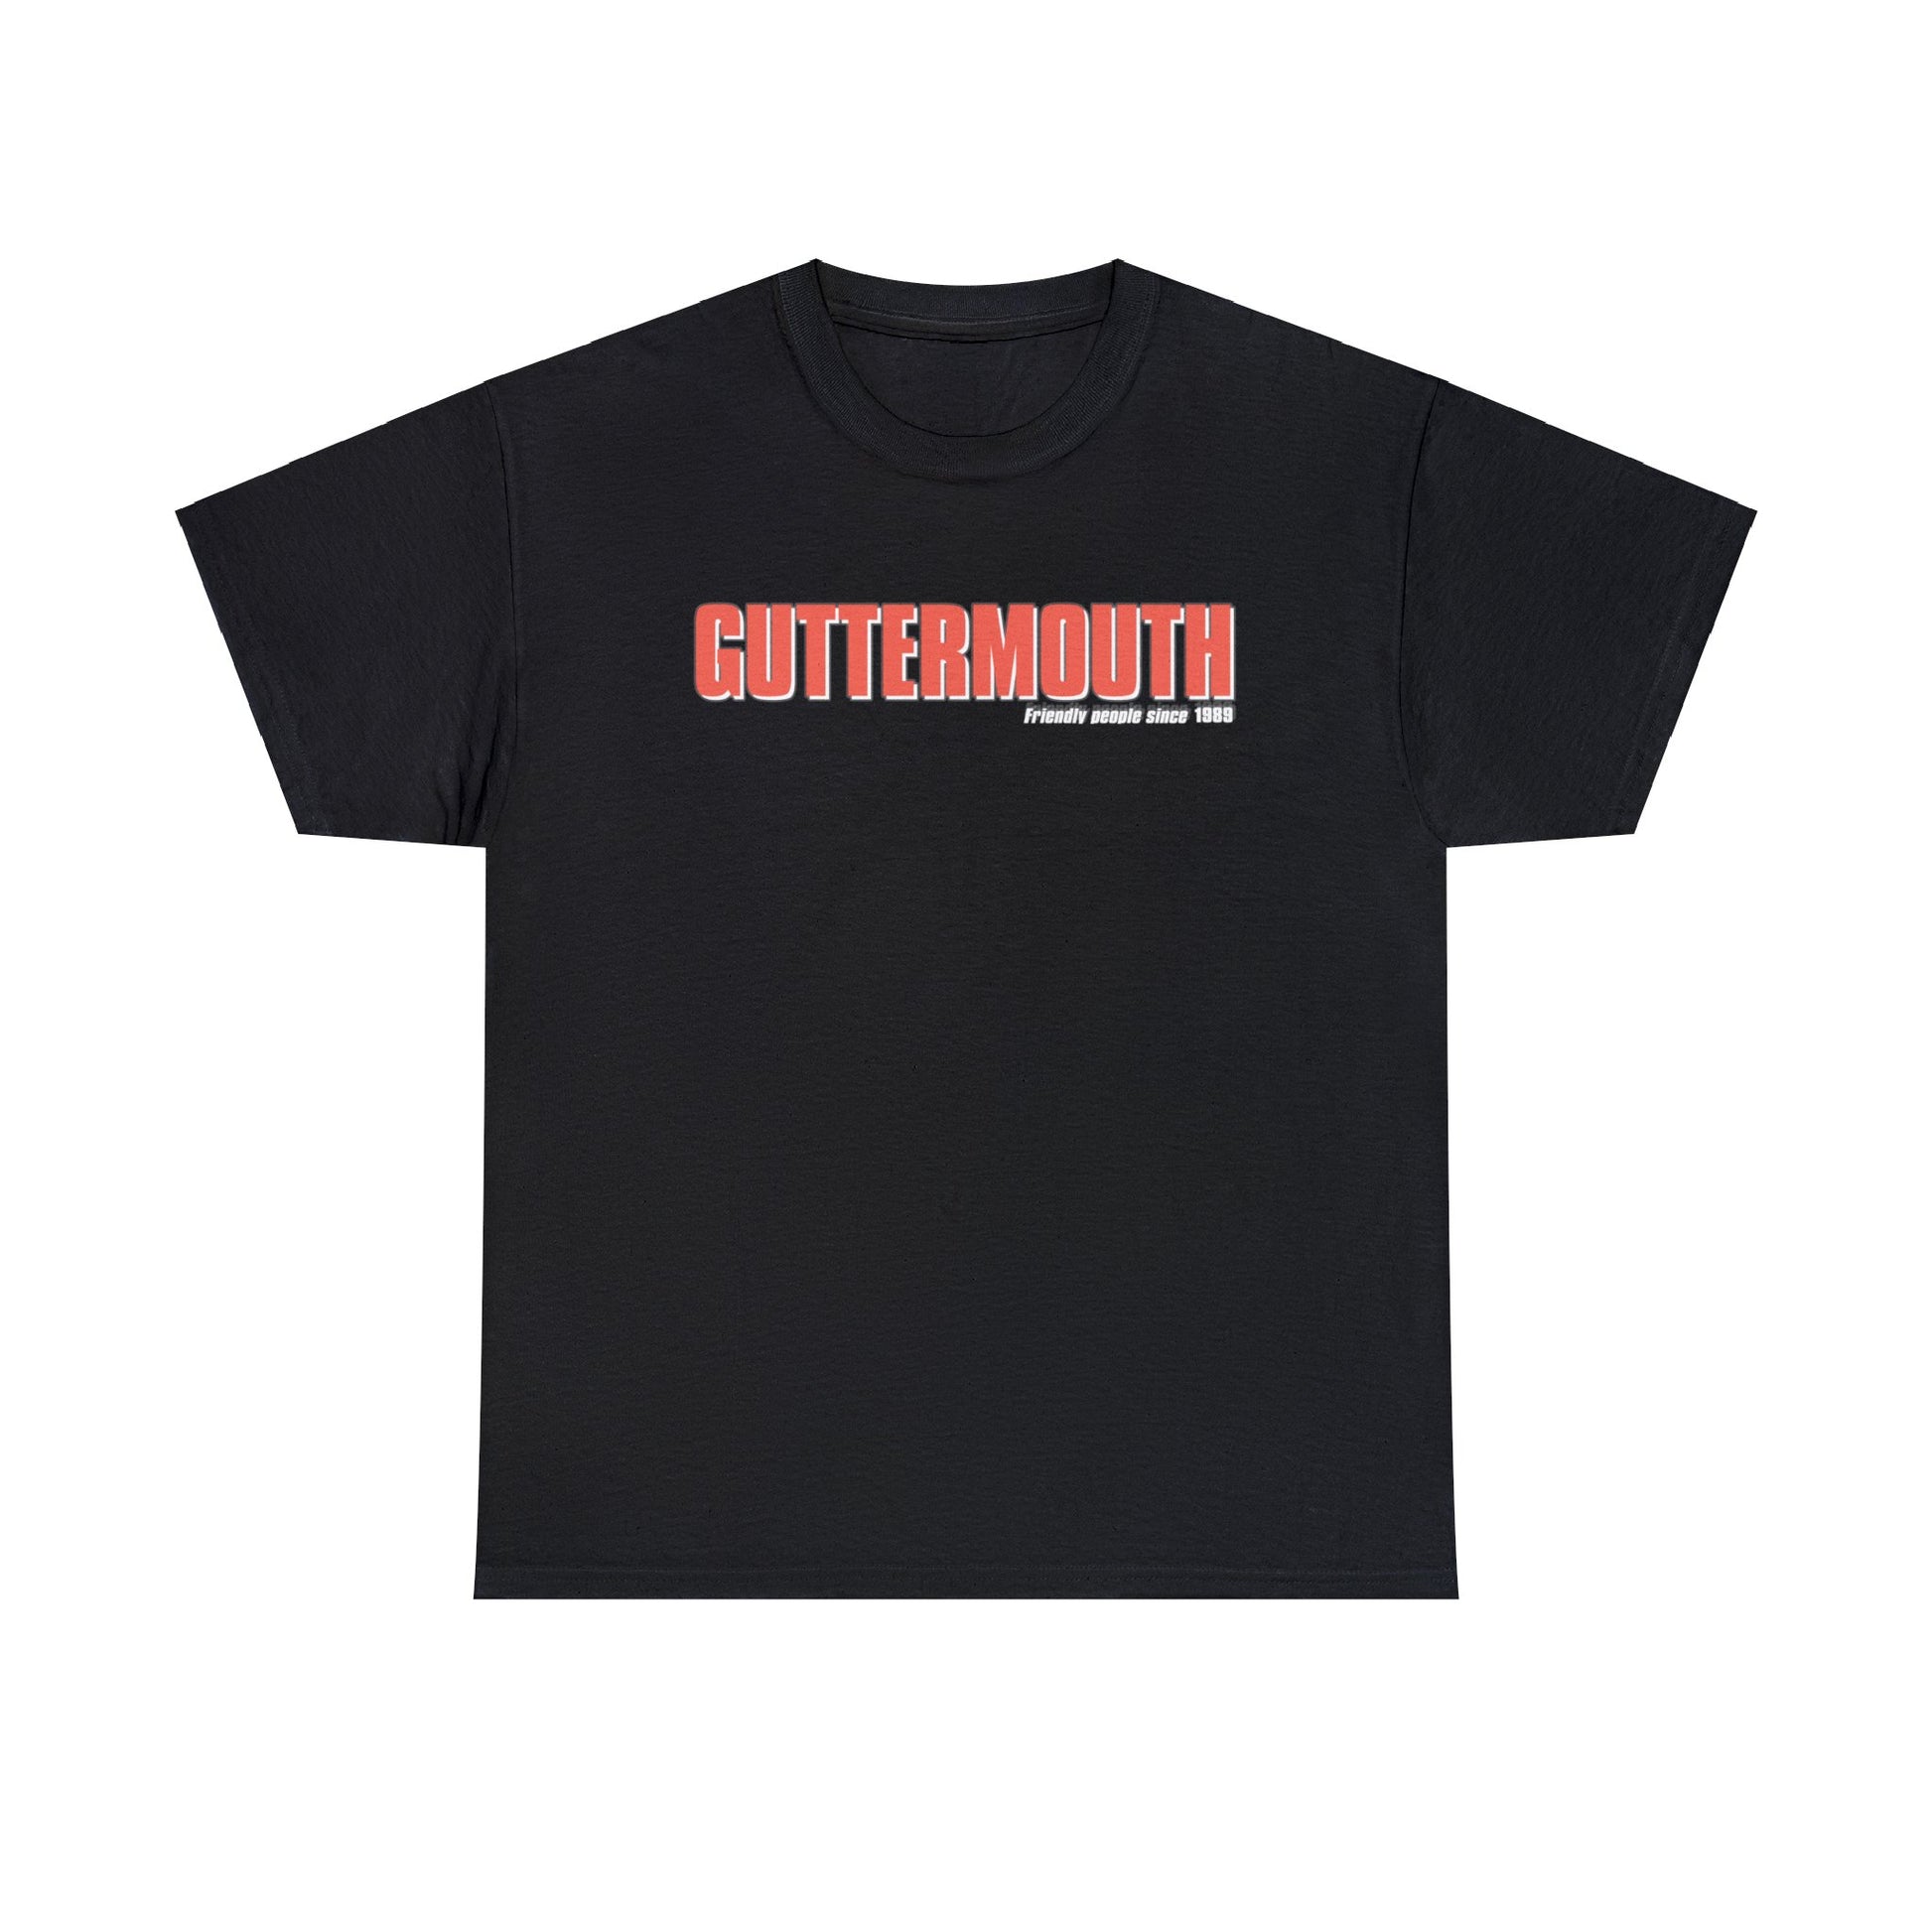 Guttermouth American Punk Rock 1980 T-shirt for Sale